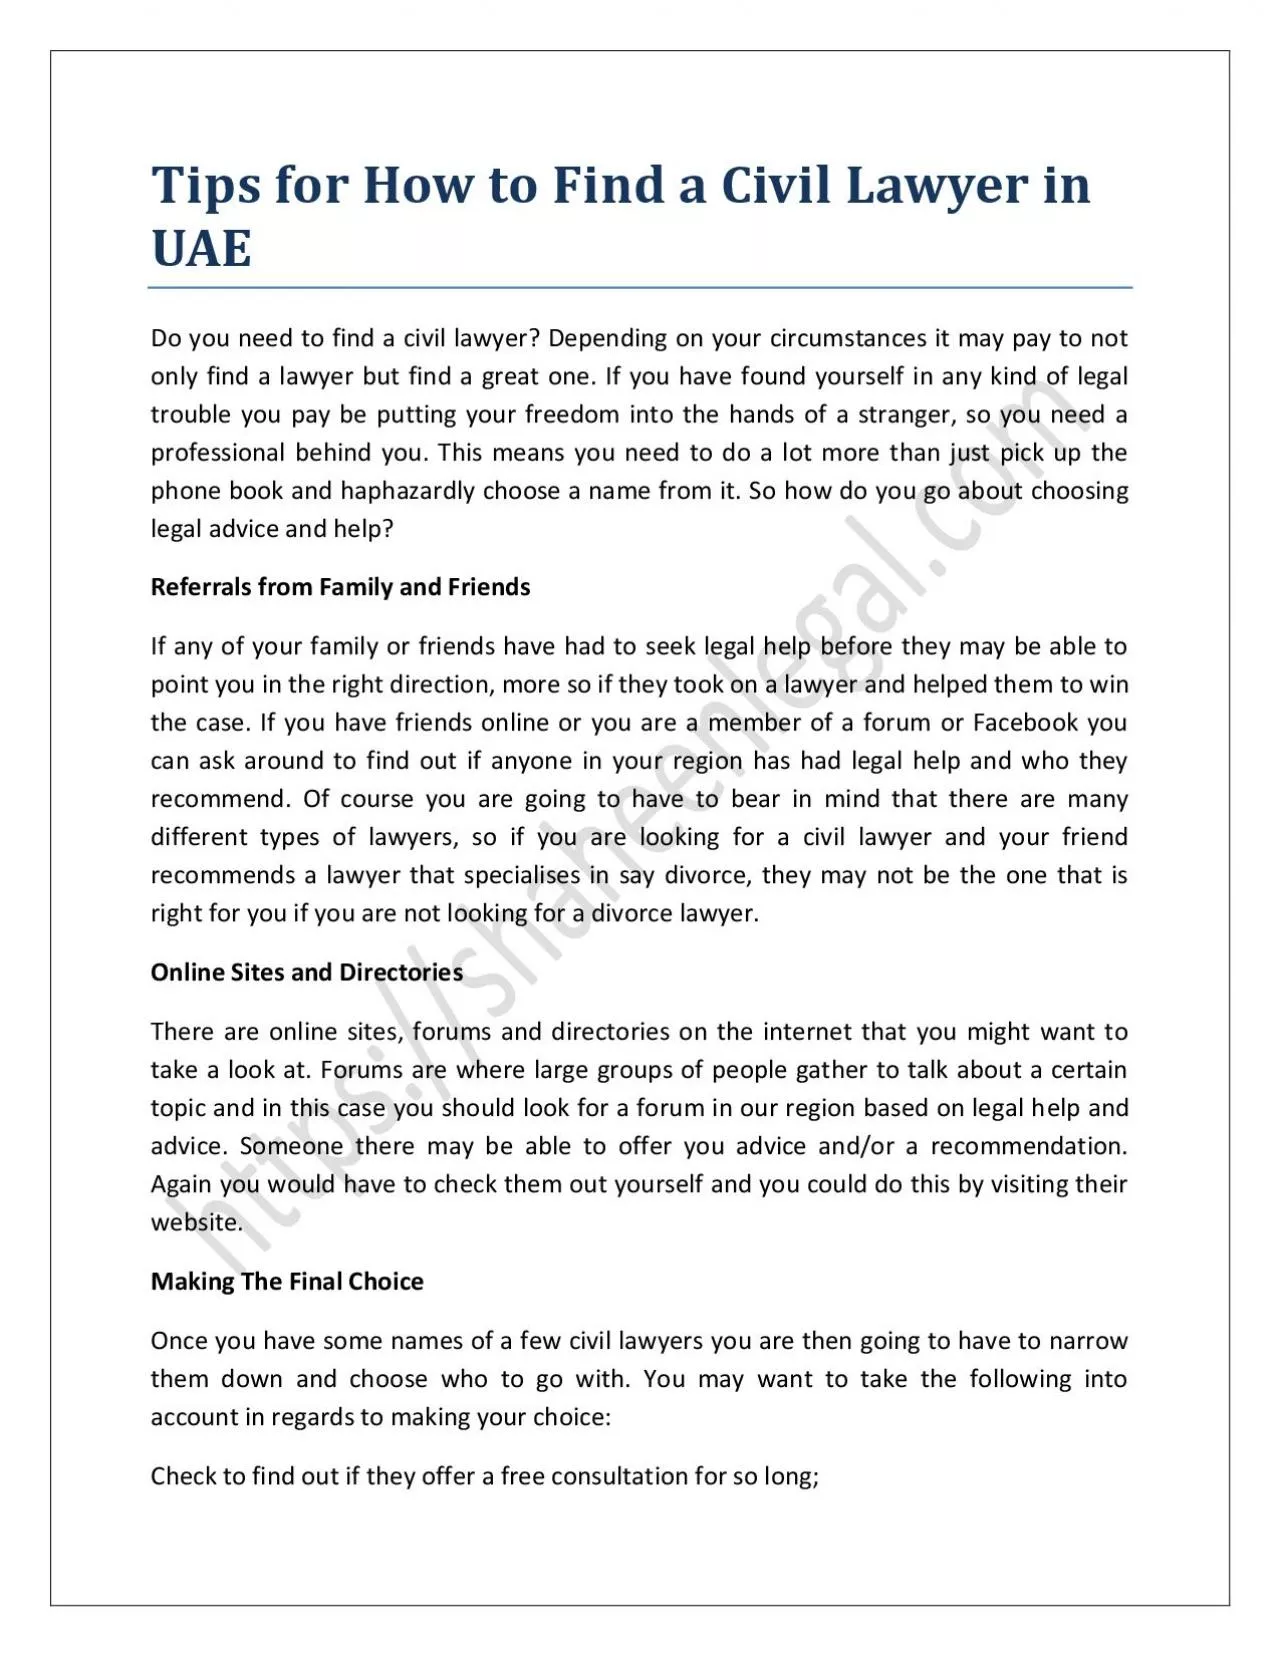 Tips for How to Find a Civil Lawyer in UAE